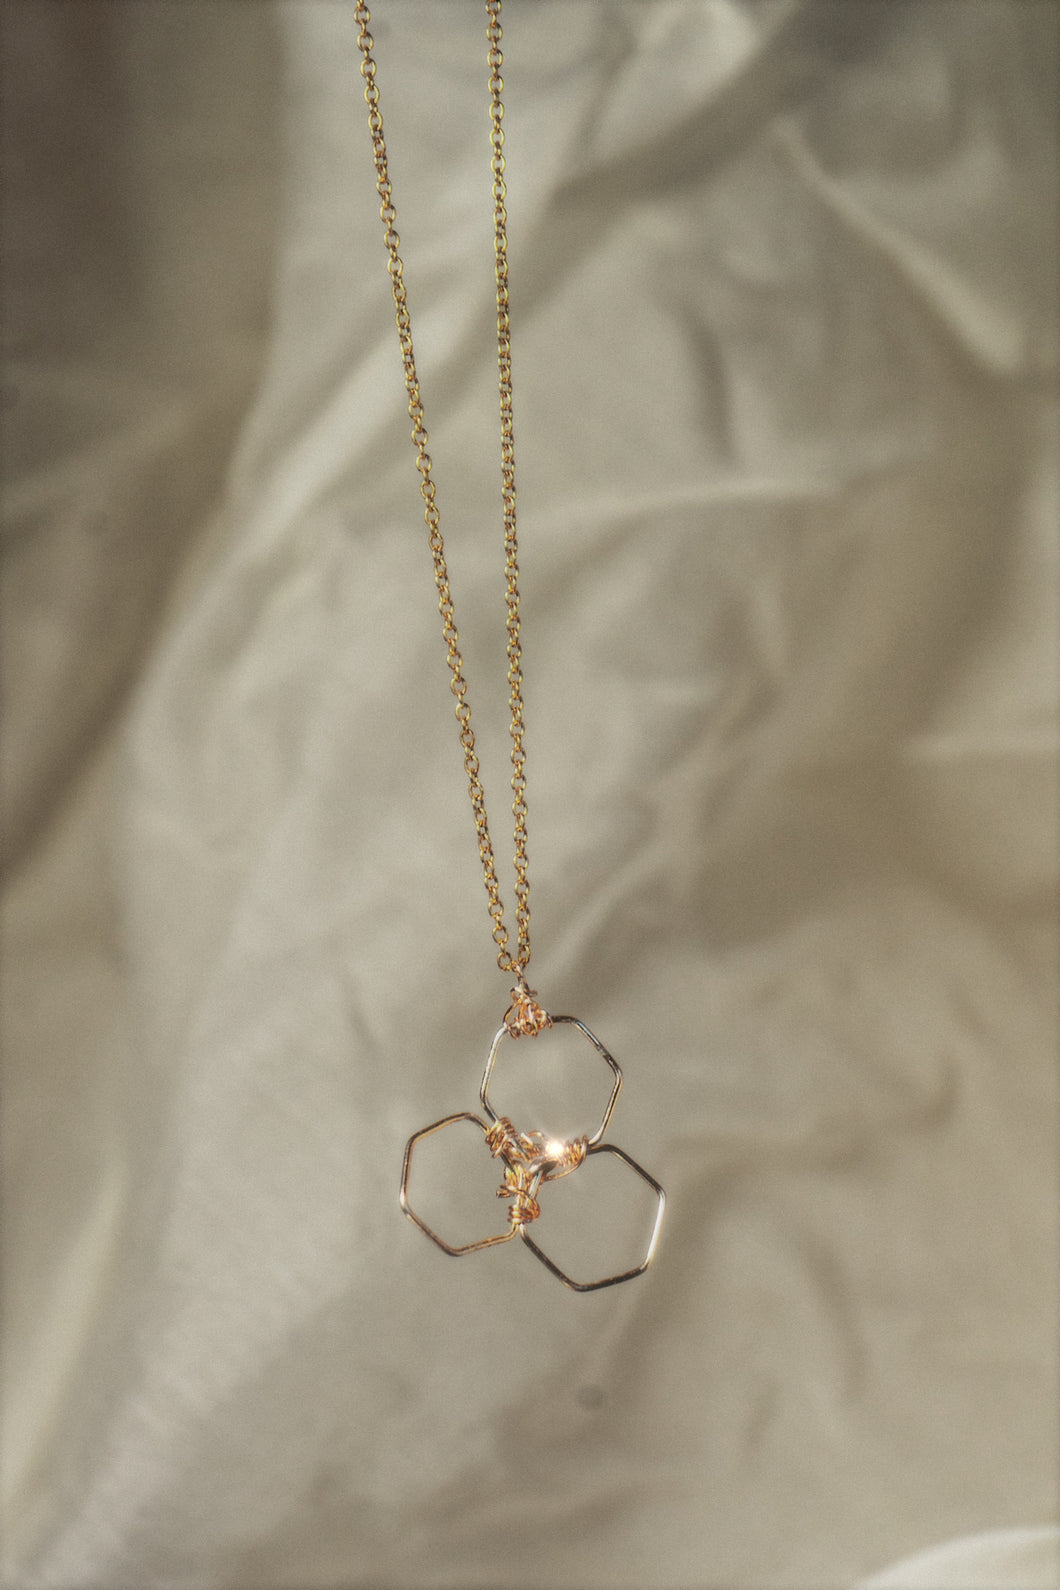 Goldnwire Honeycomb Necklace